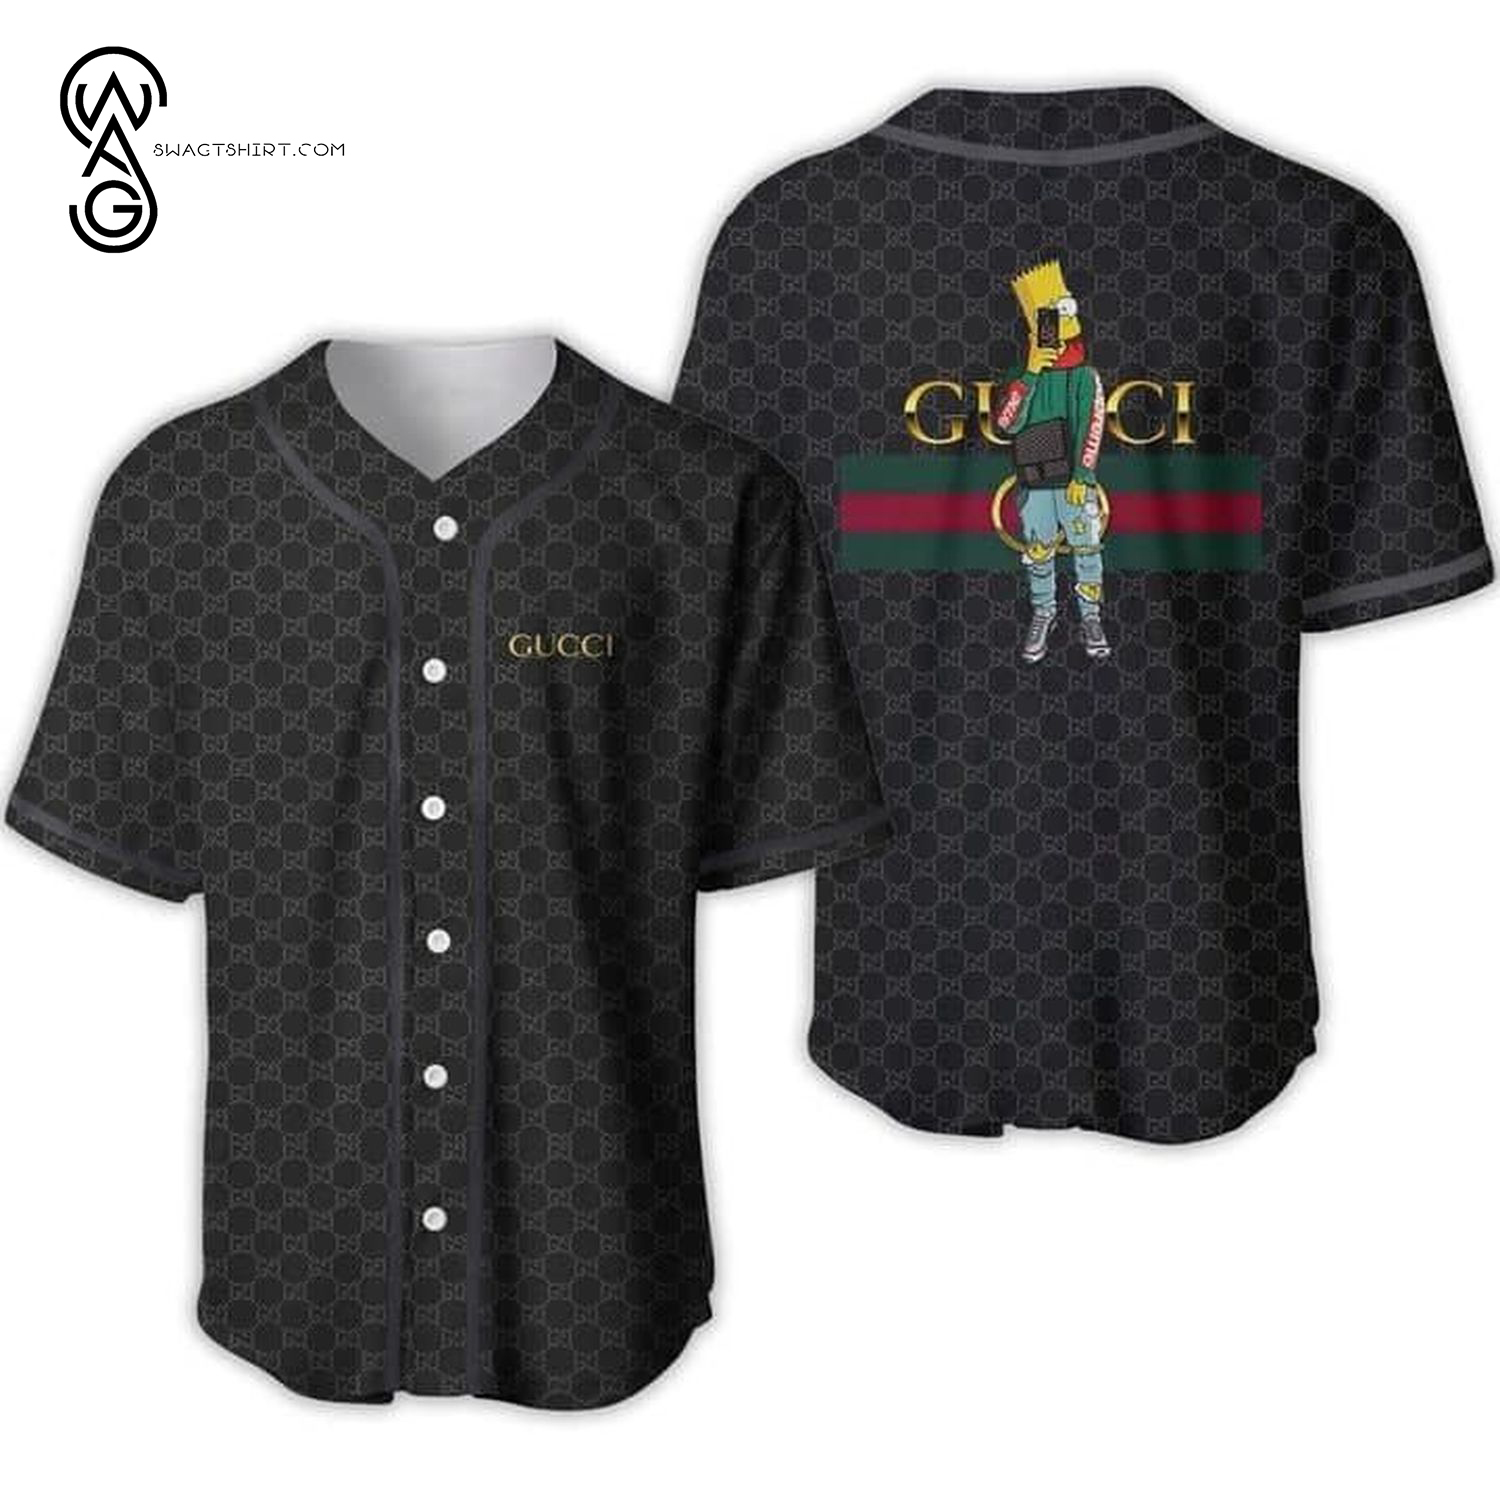 Gucci The Simpsons Full Printed Baseball Jersey